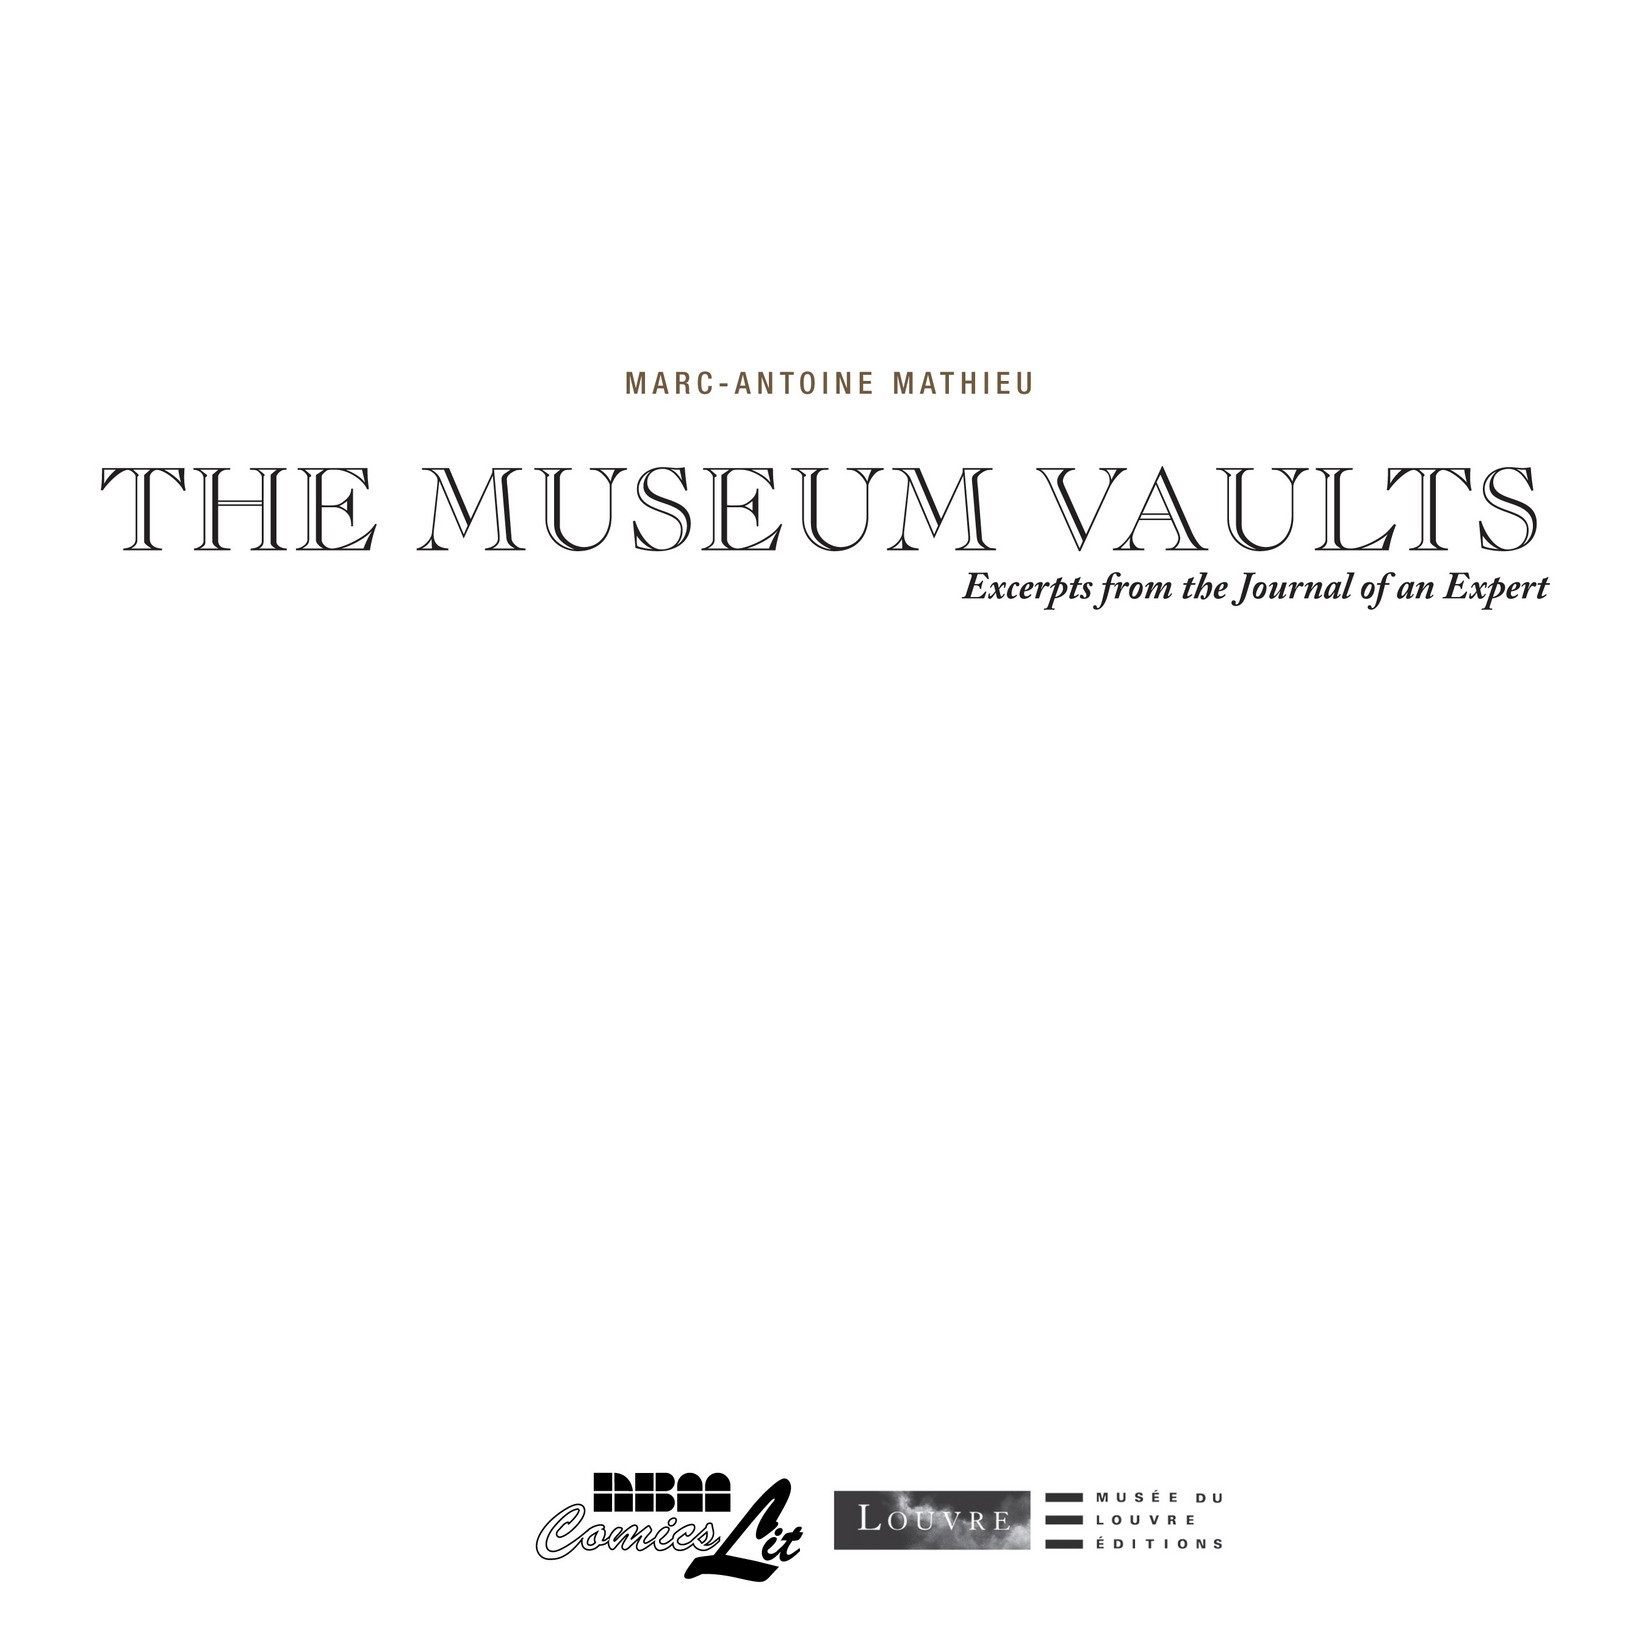 Read online Museum Vaults: Excerpts from the Journal of an Expert comic -  Issue # Full - 4